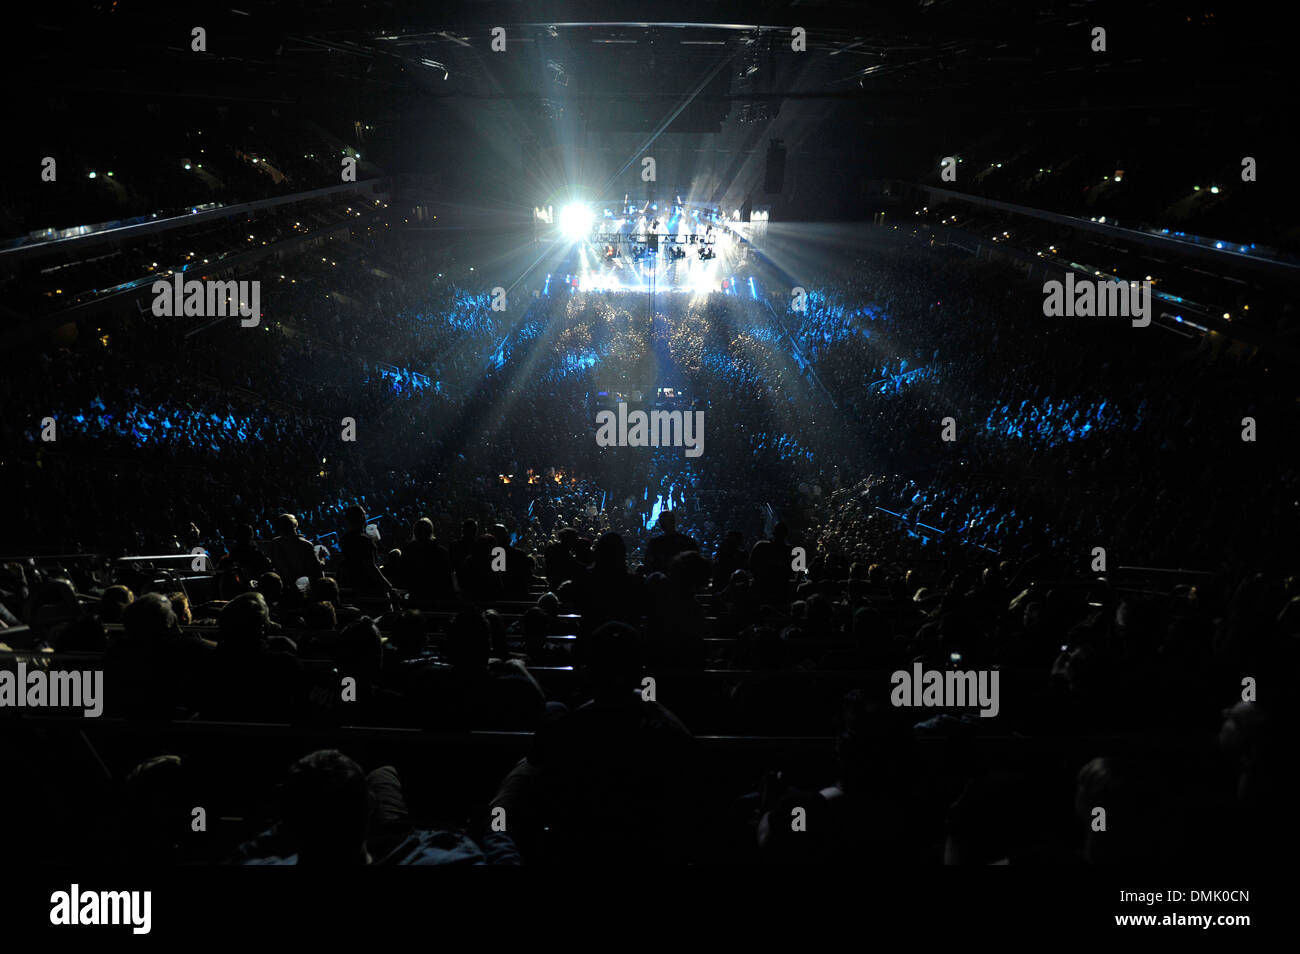 View of the stage and crowd at the O2 Word Arena in Berlin, Germany during a concert by Danish rock band VOLBEAT. Stock Photo